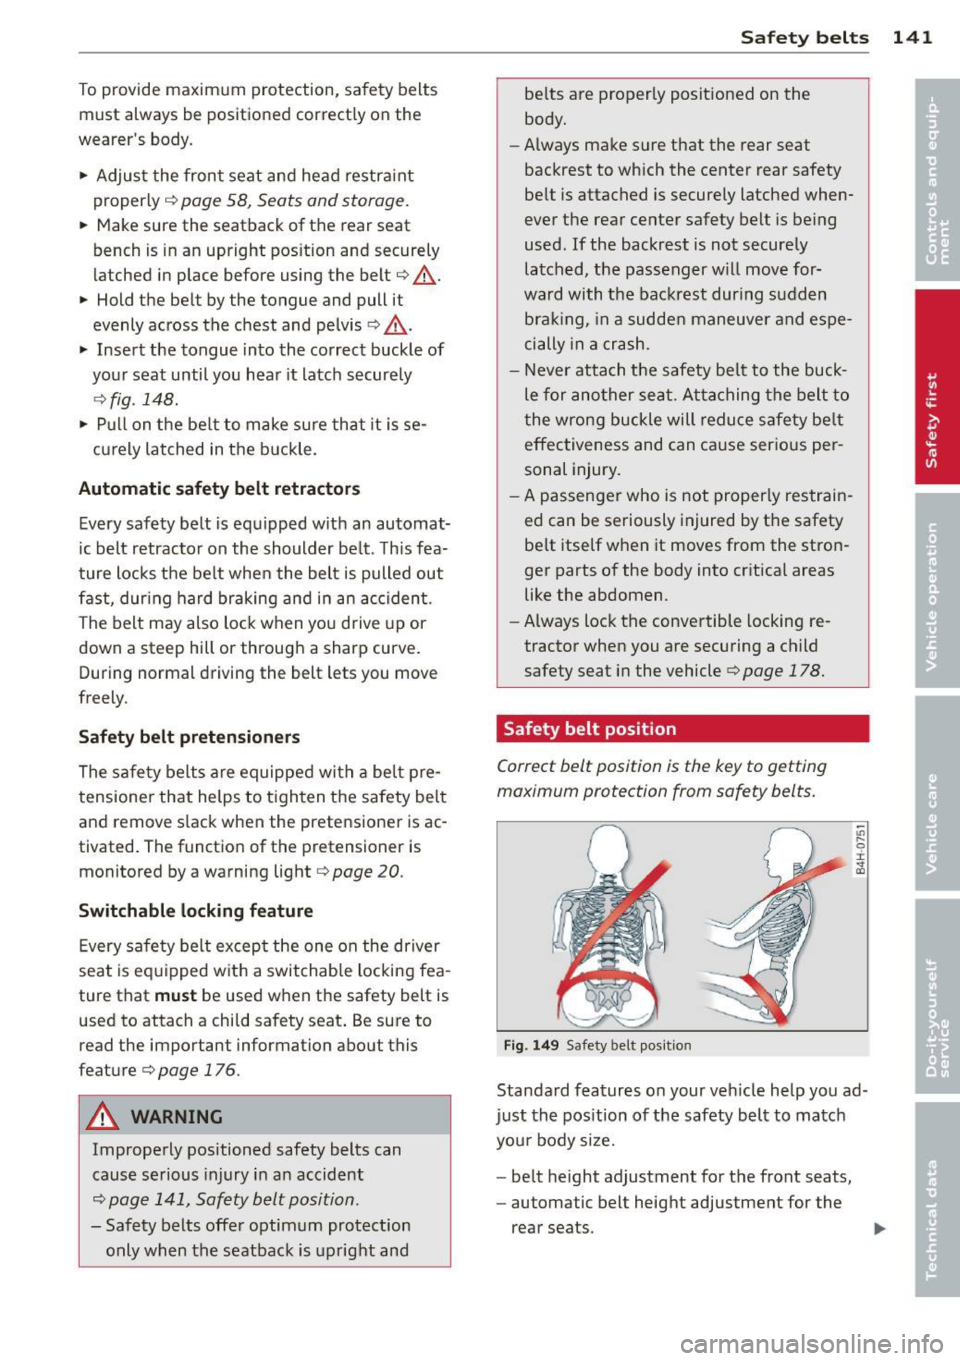 AUDI S4 2013  Owners Manual To provide  maximum  protection,  safety  belts 
must  always  be  positioned correctly  on  the 
wearers  body . 
...  Adjust  the front  seat  and head  restra int 
properly 
r::!:>  page  58,  Sea